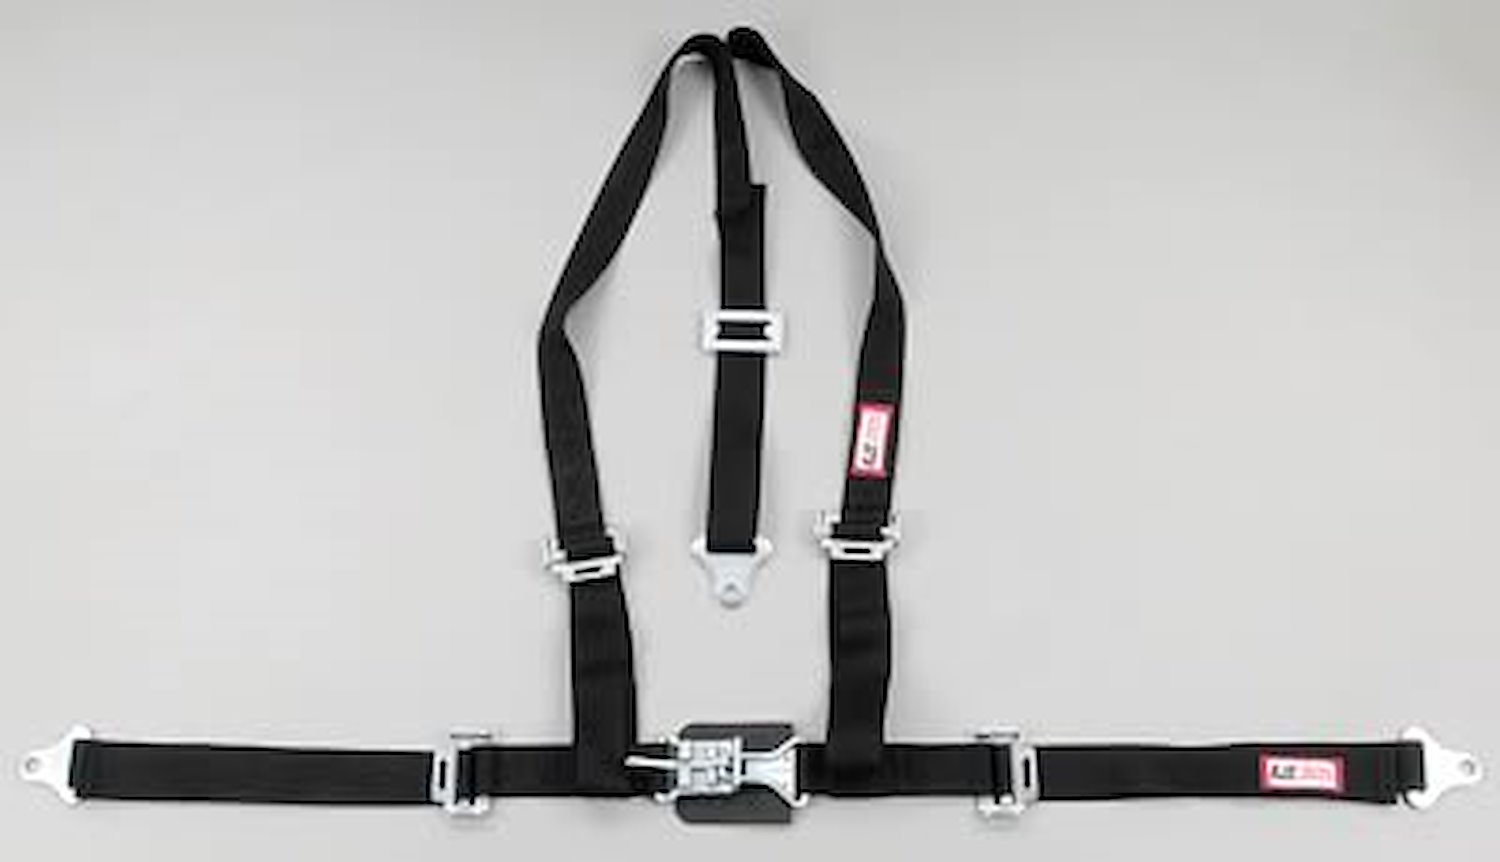 NON-SFI L&L HARNESS 2 PULL UP Lap Belt SEWN IN 2 S.H. V ROLL BAR Mount w/STERNUM STRAP ALL WRAP ENDS GRAY